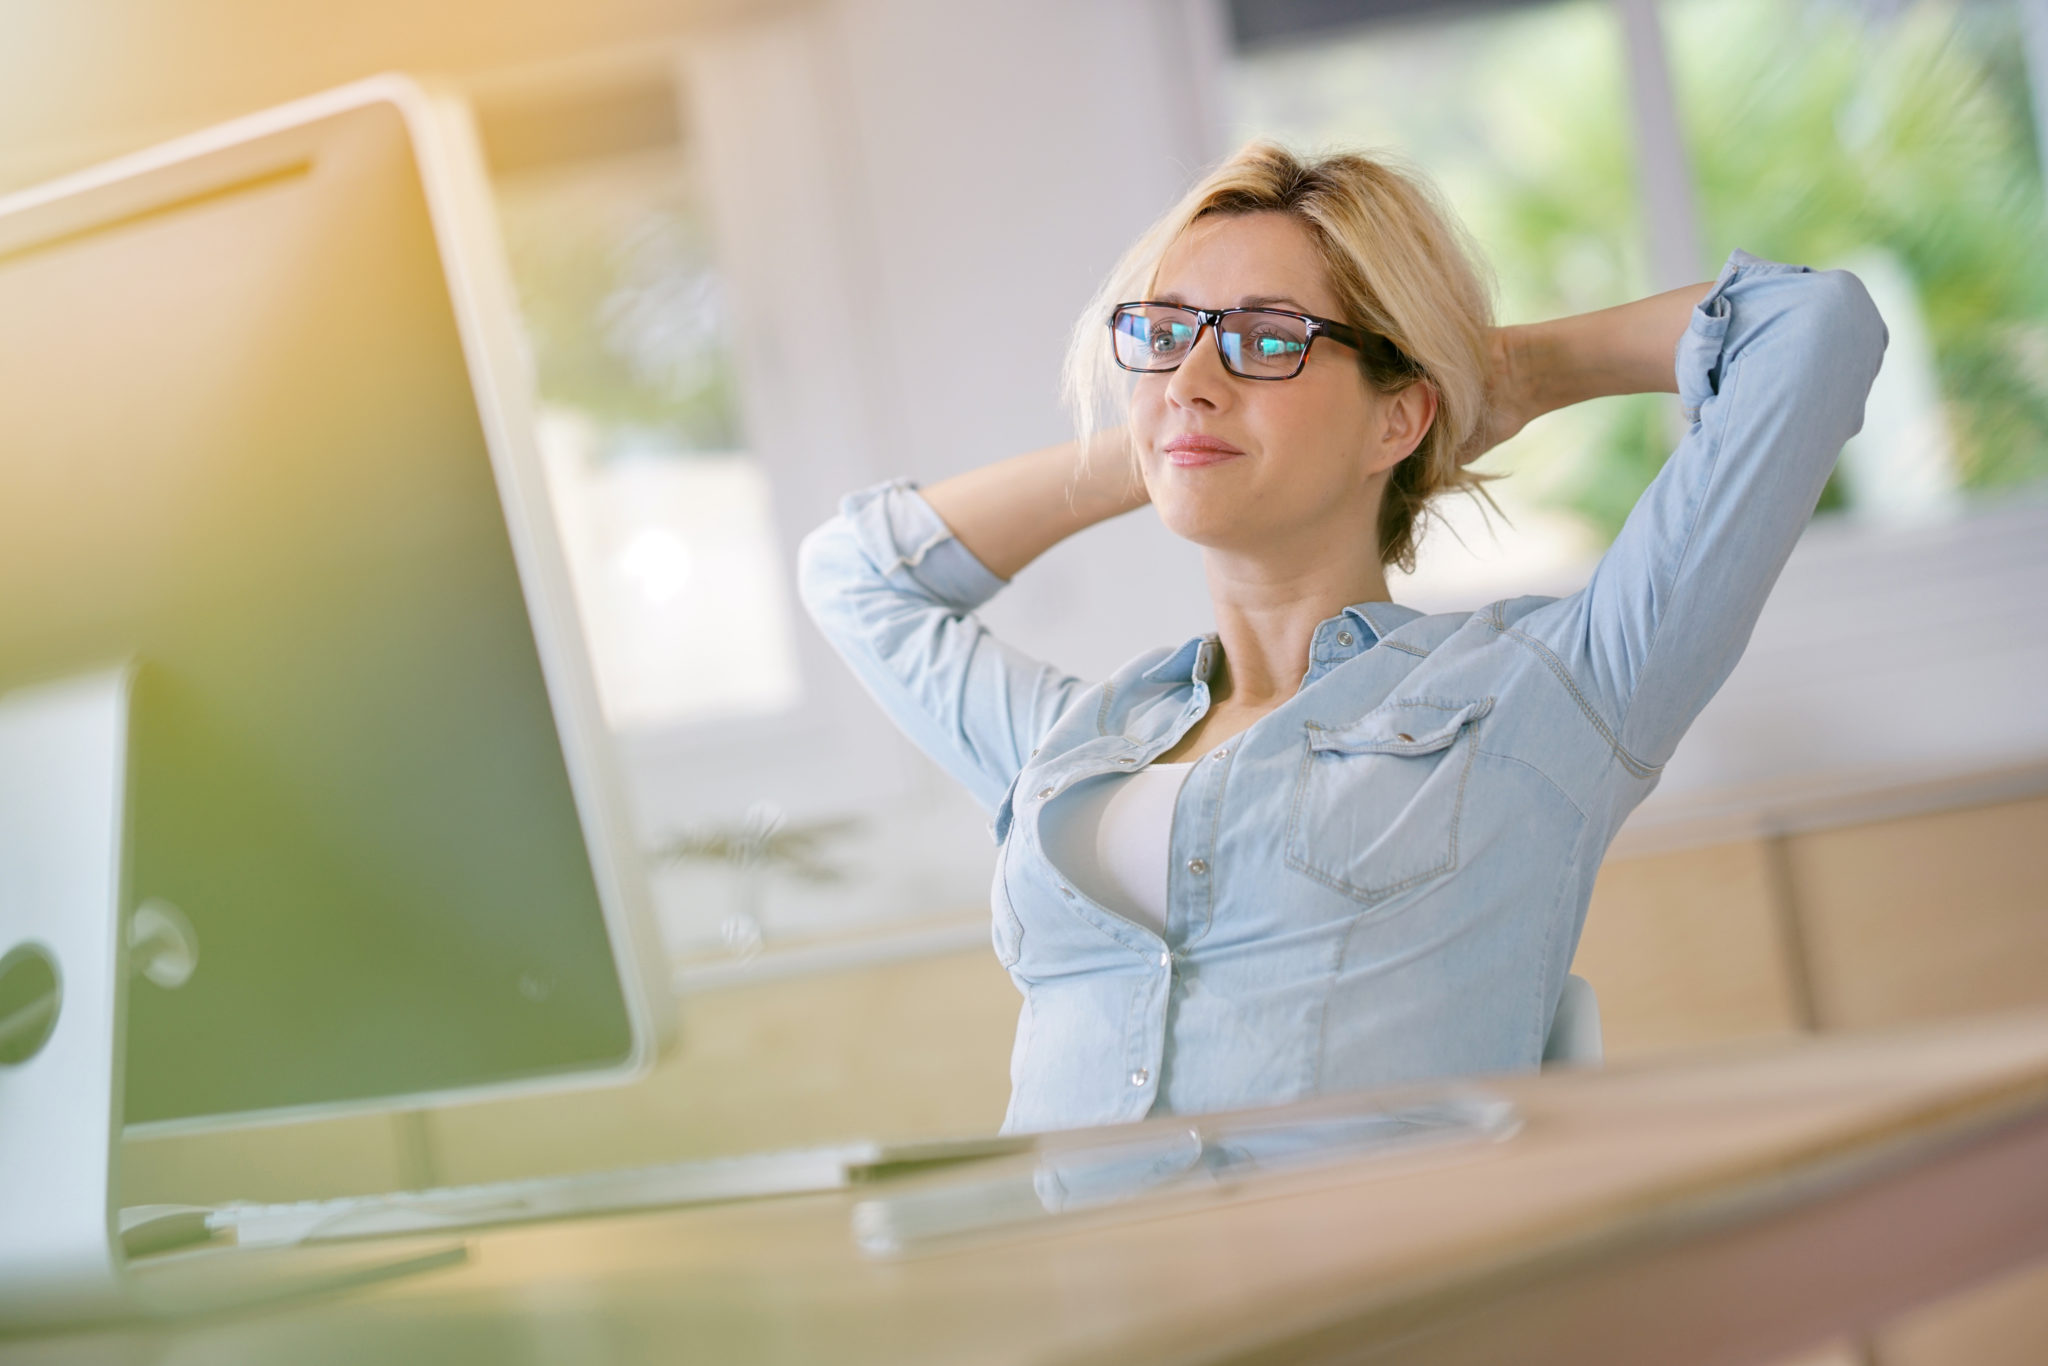 Preventing Neck Pain While Working